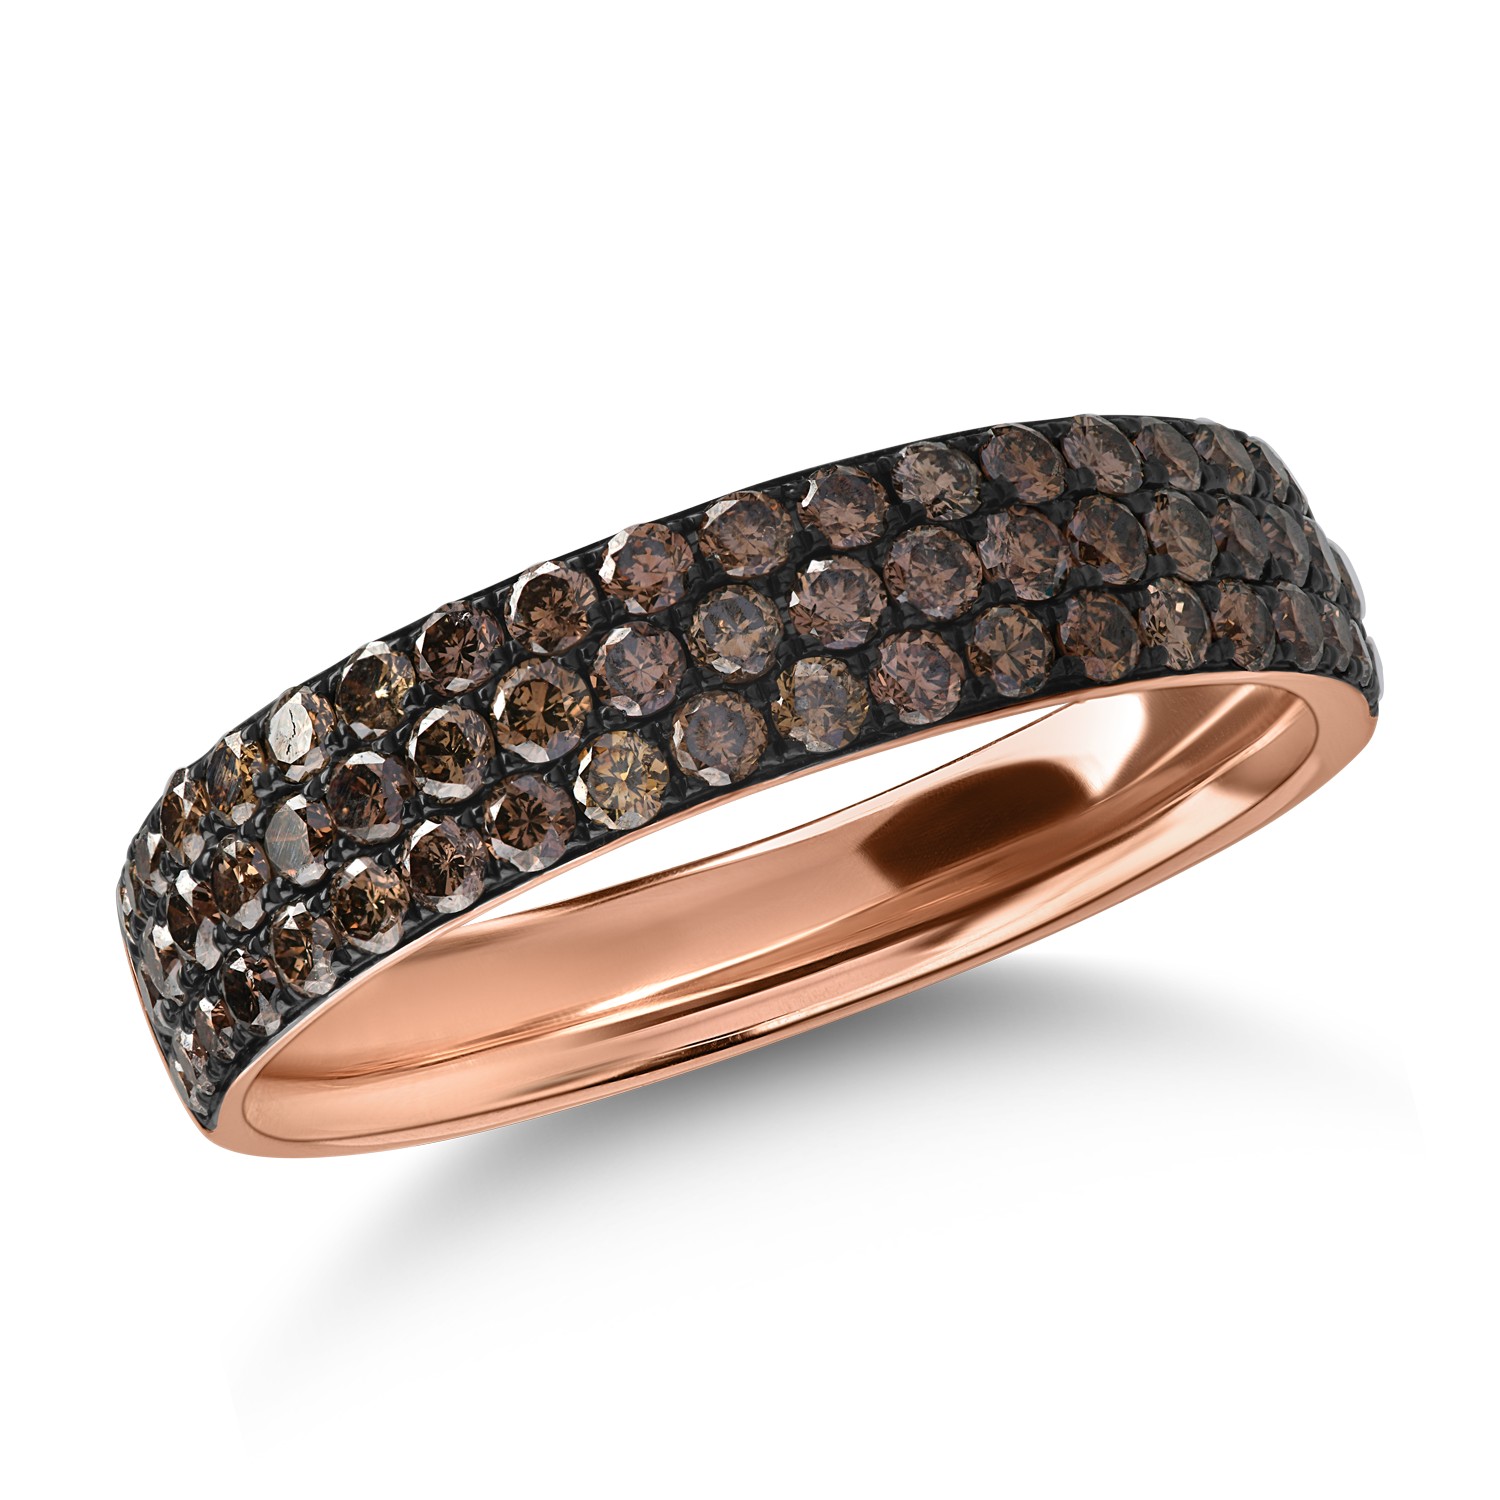 Half eternity ring in rose gold with 0.95ct brown diamonds